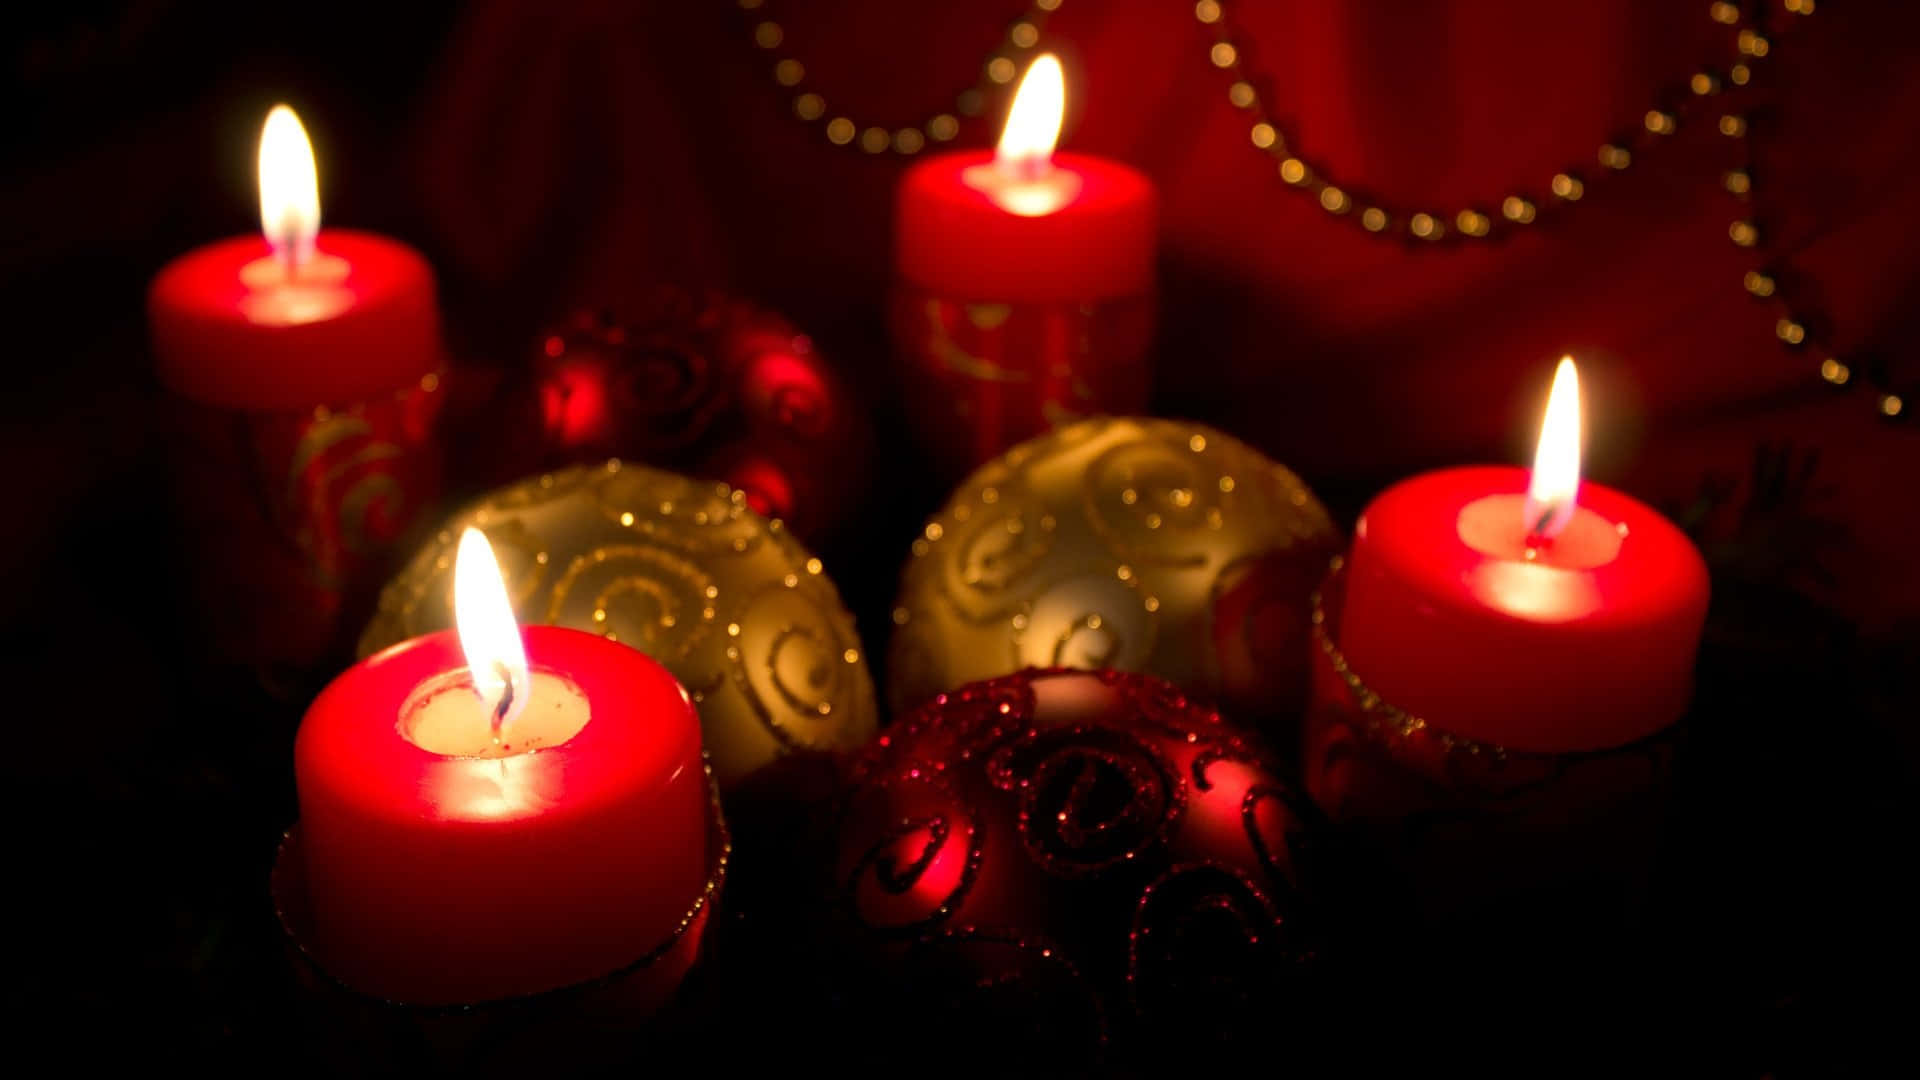 The anticipation of Christmas brings joy during Advent